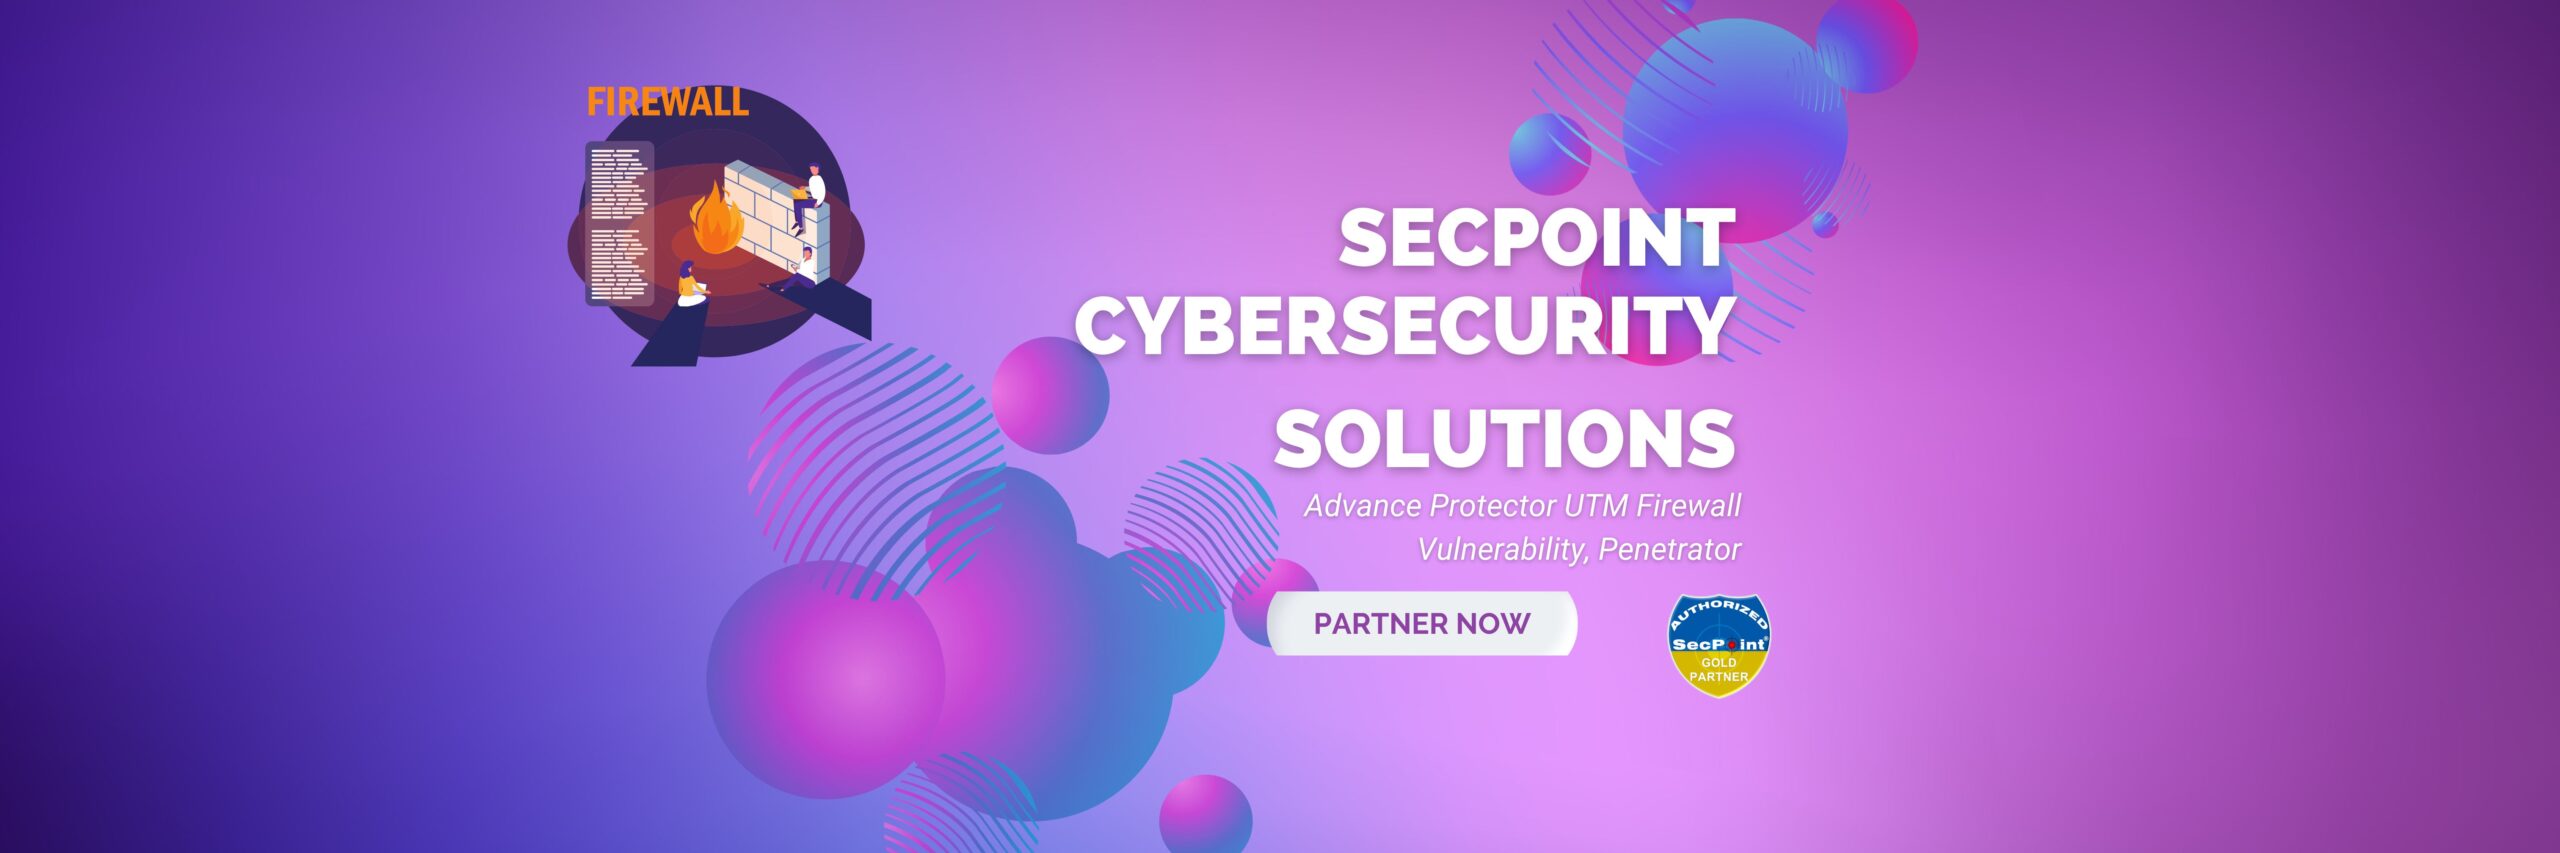 Secpoint Cybersecurity Penetrator, Secpoint UTM and vulnerability scanner